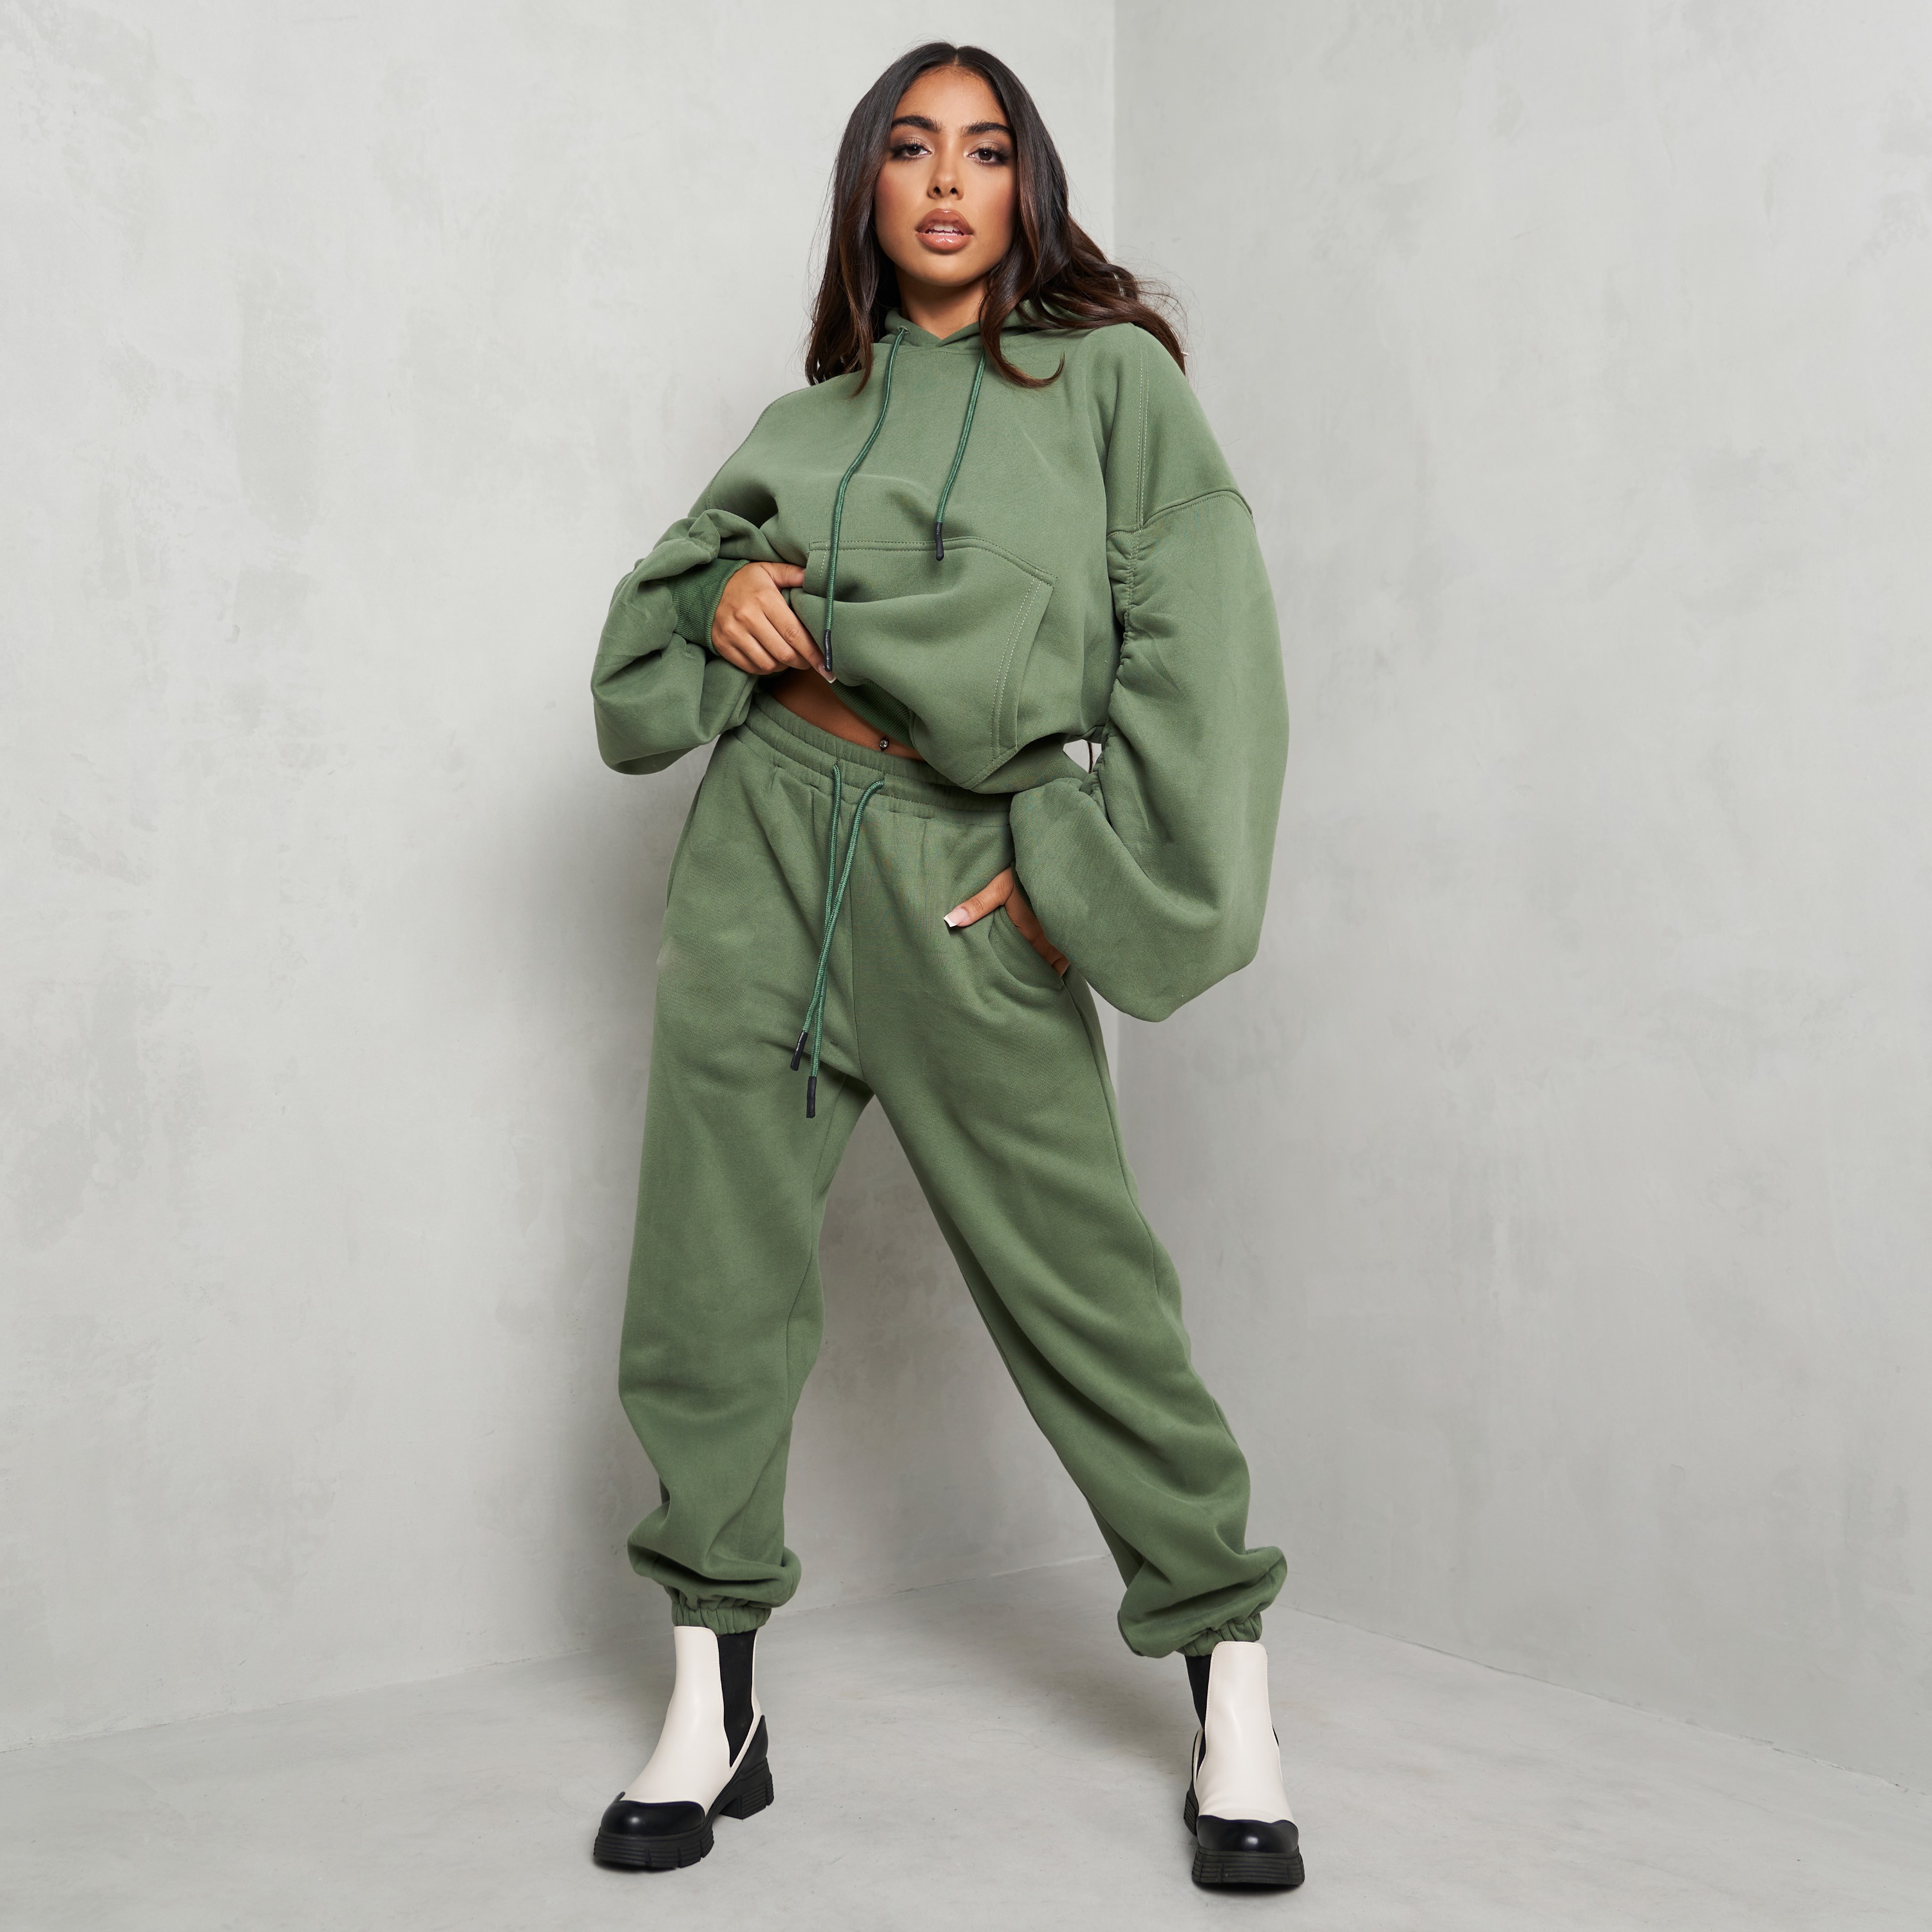 Ruched Sleeve Hoodie And Jogger Set In Khaki Green UK Medium M, Green